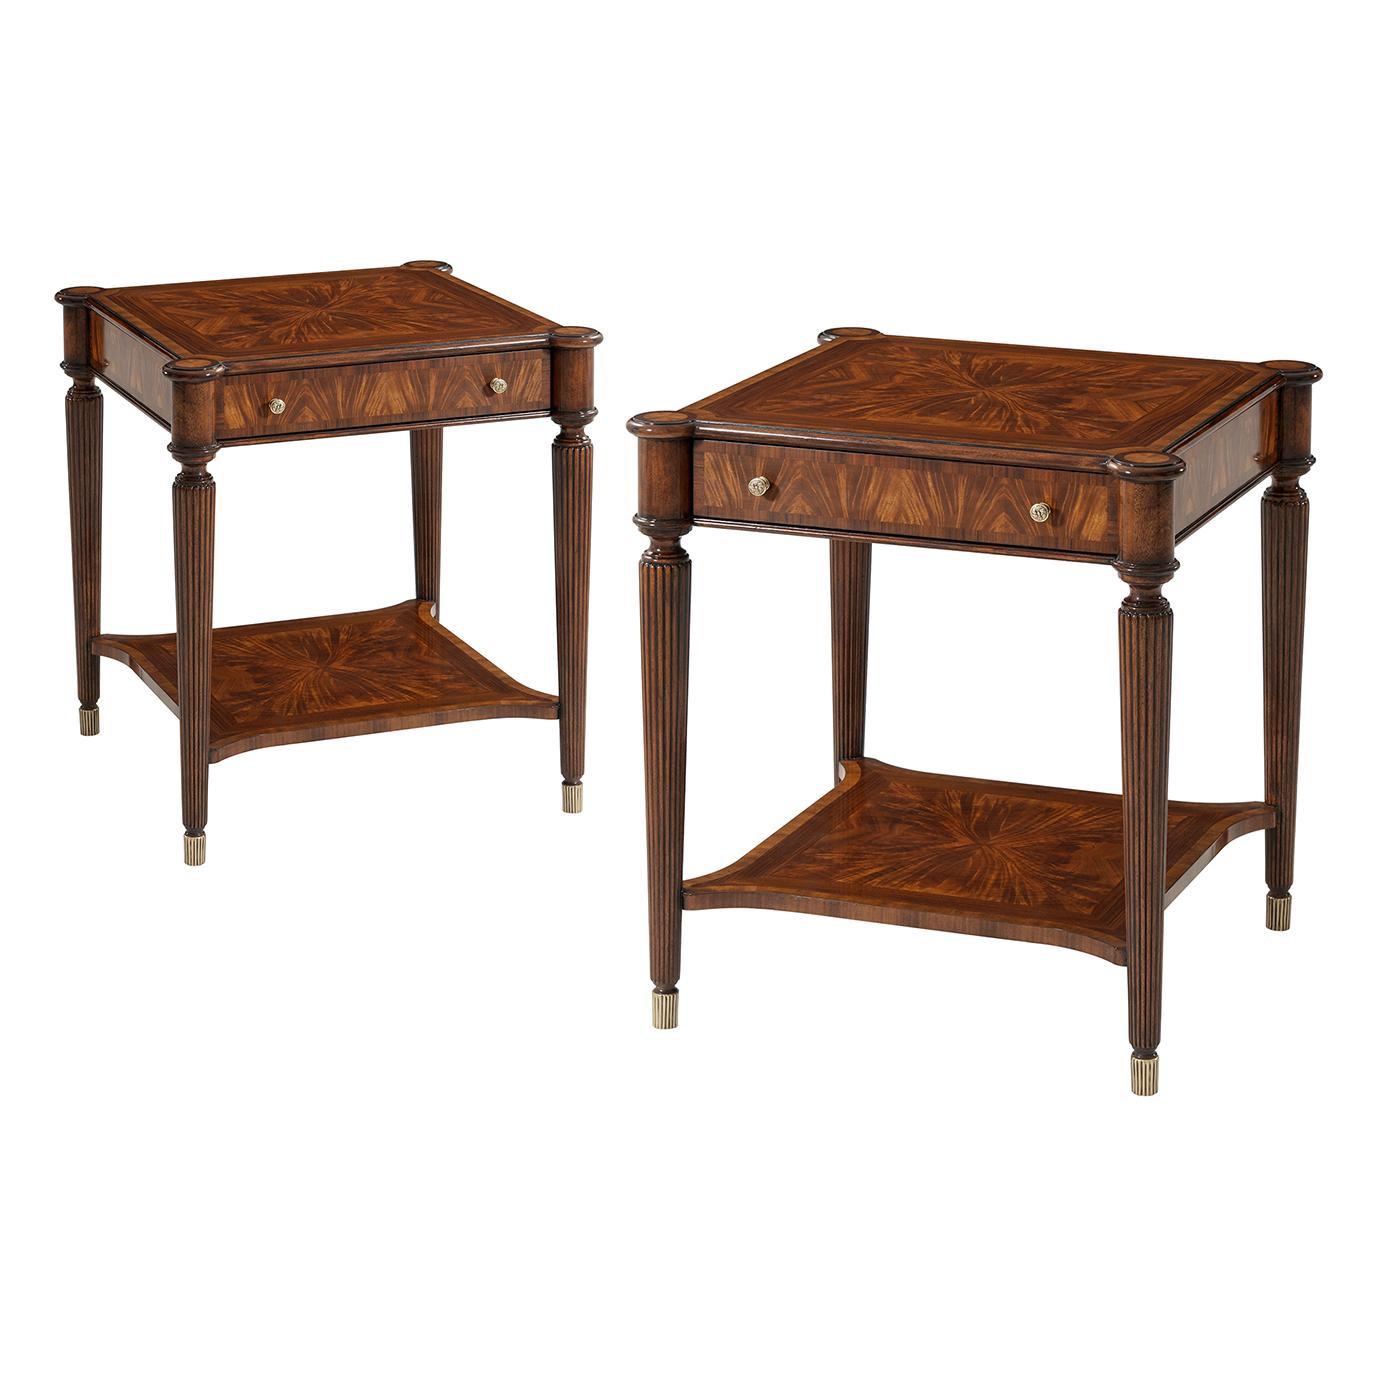 Pair of English Reeded Leg End Tables